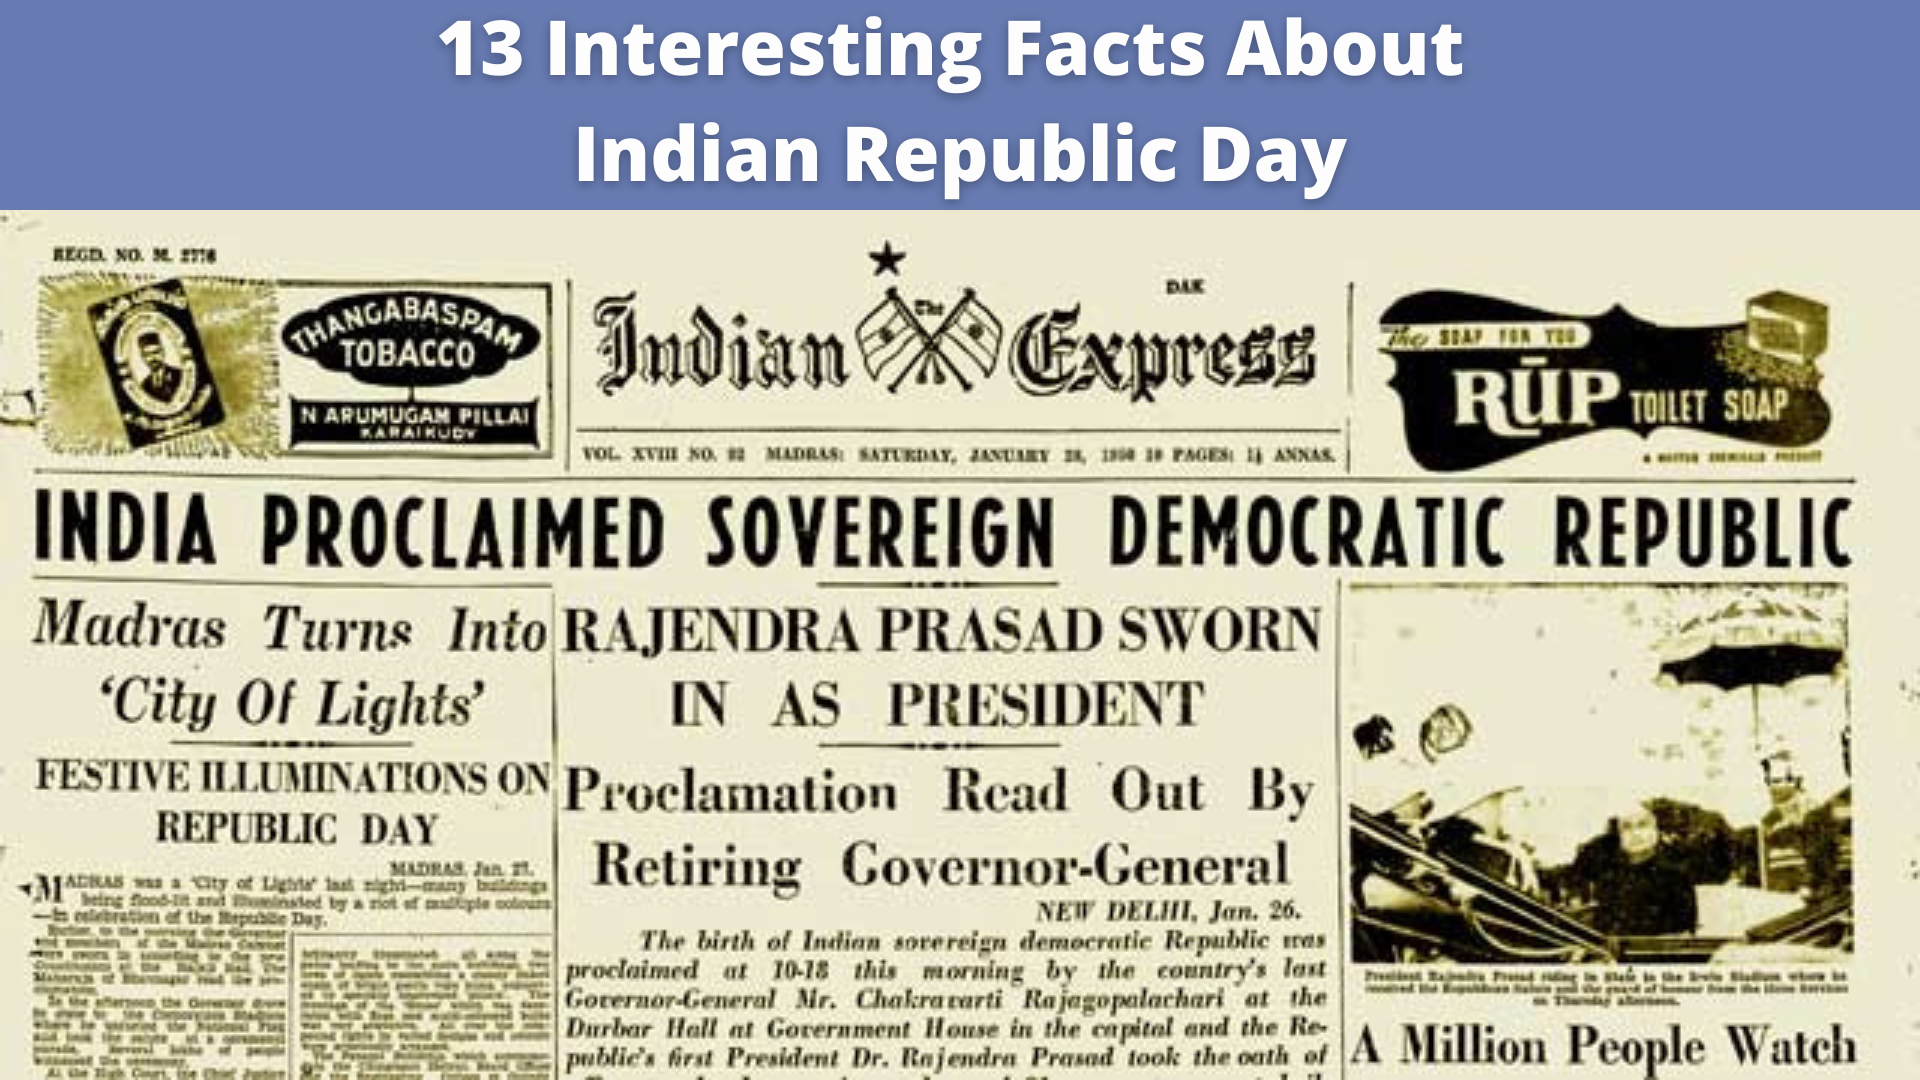 13 Interesting Facts About Indian Republic Day – January 26